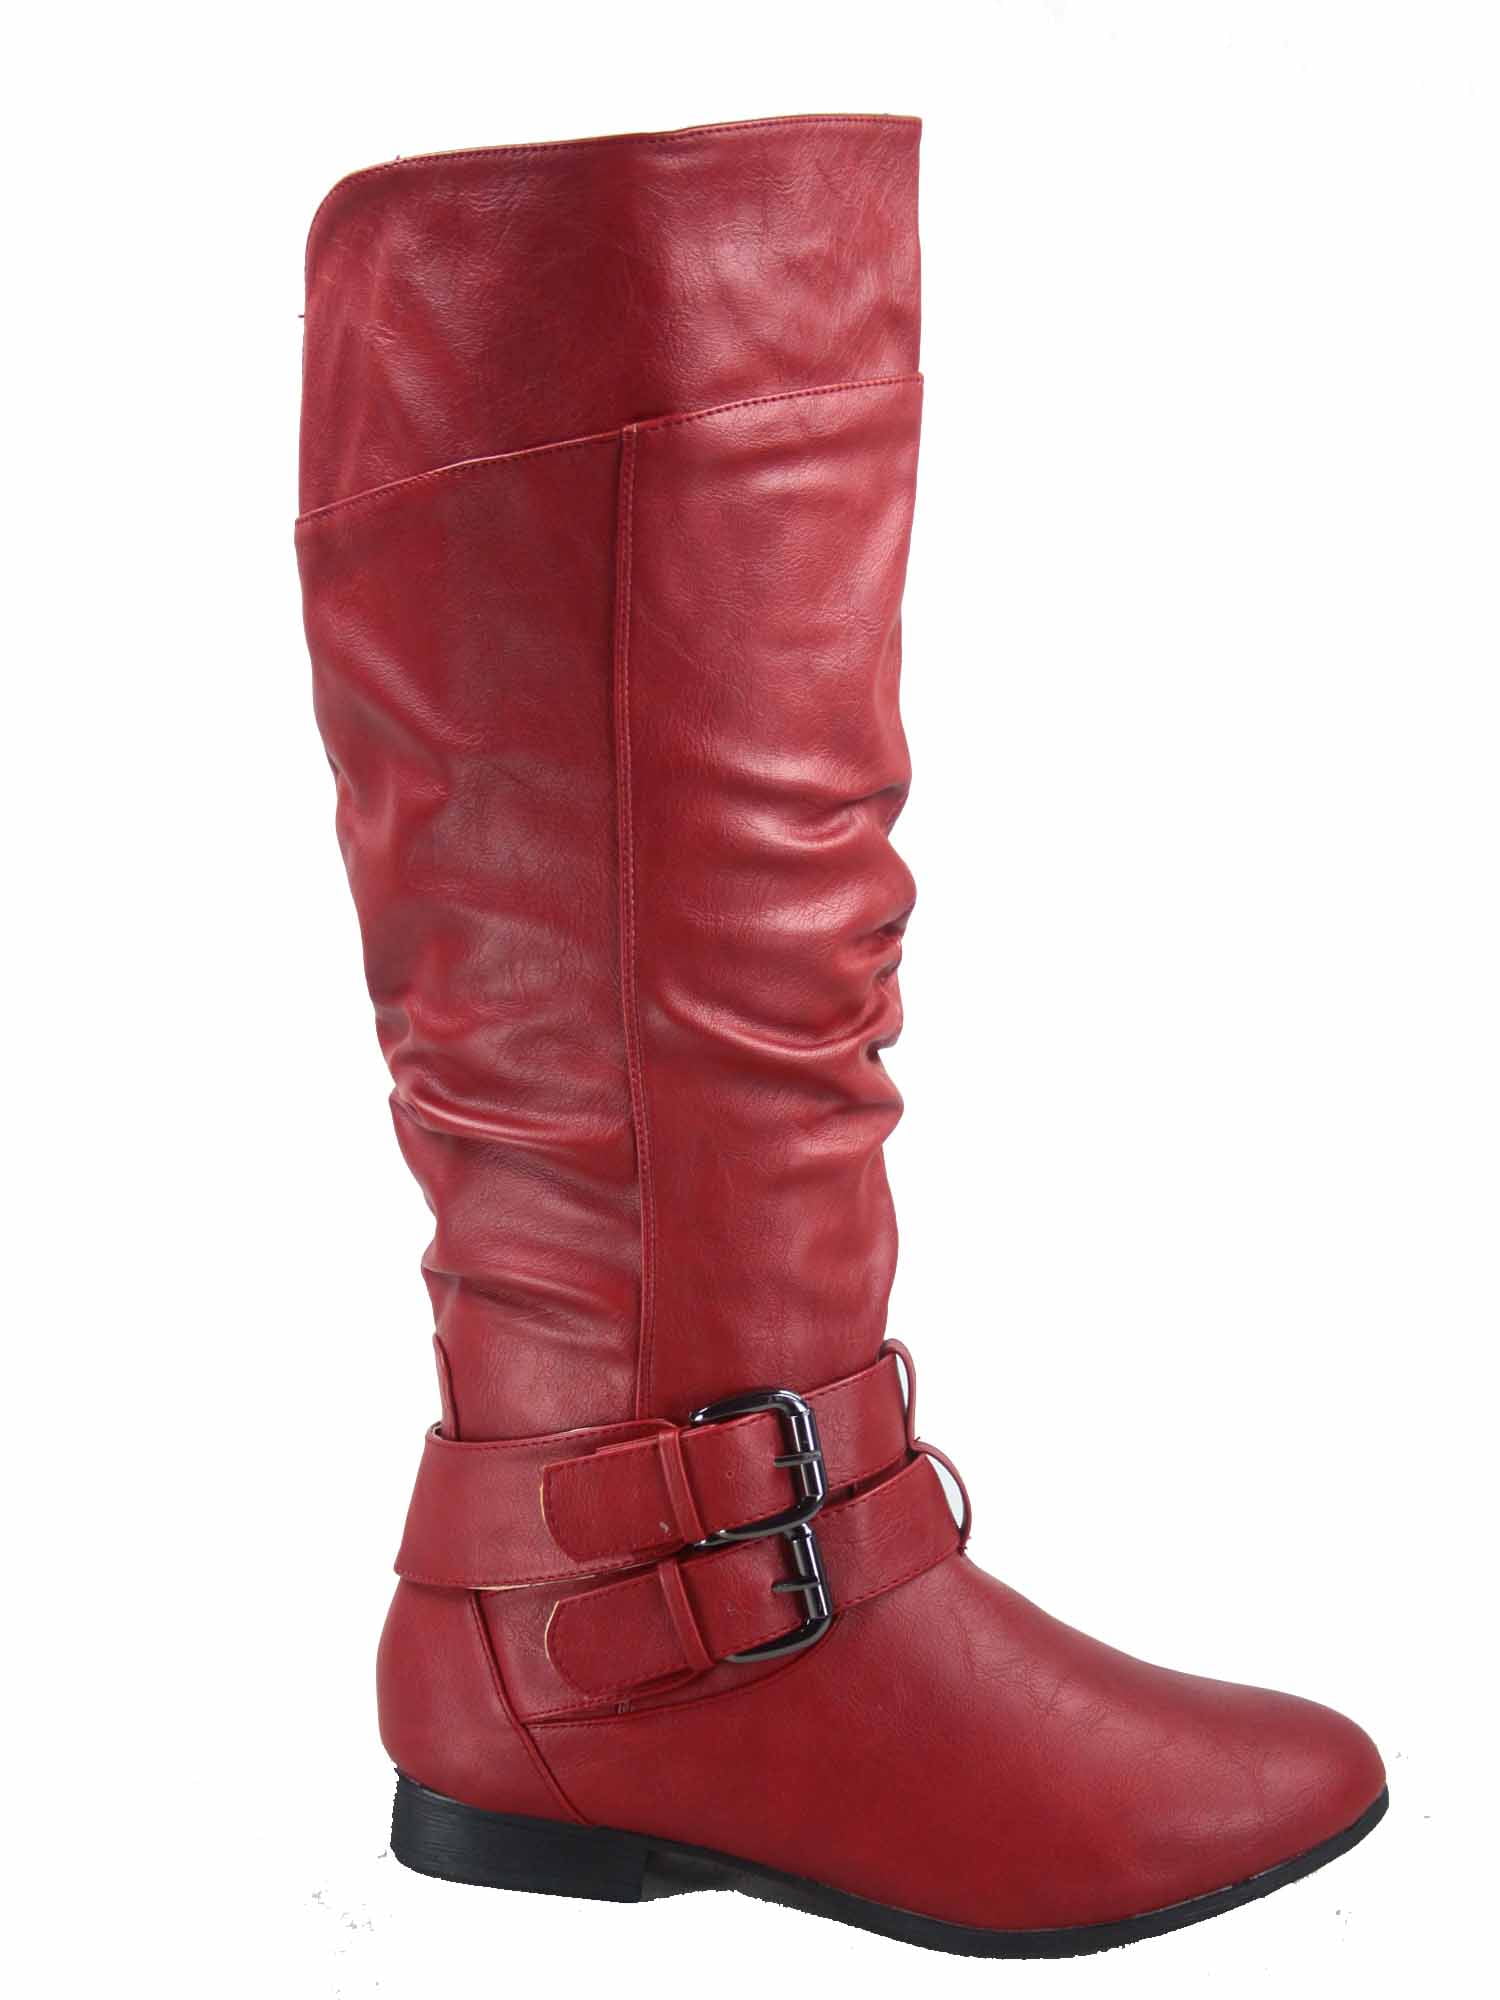 WOMENS LOW BLOCK HEEL QUILTED ZIP FASHION KNEE HIGH BOOTS LADIES SHOES SIZE 3-8 